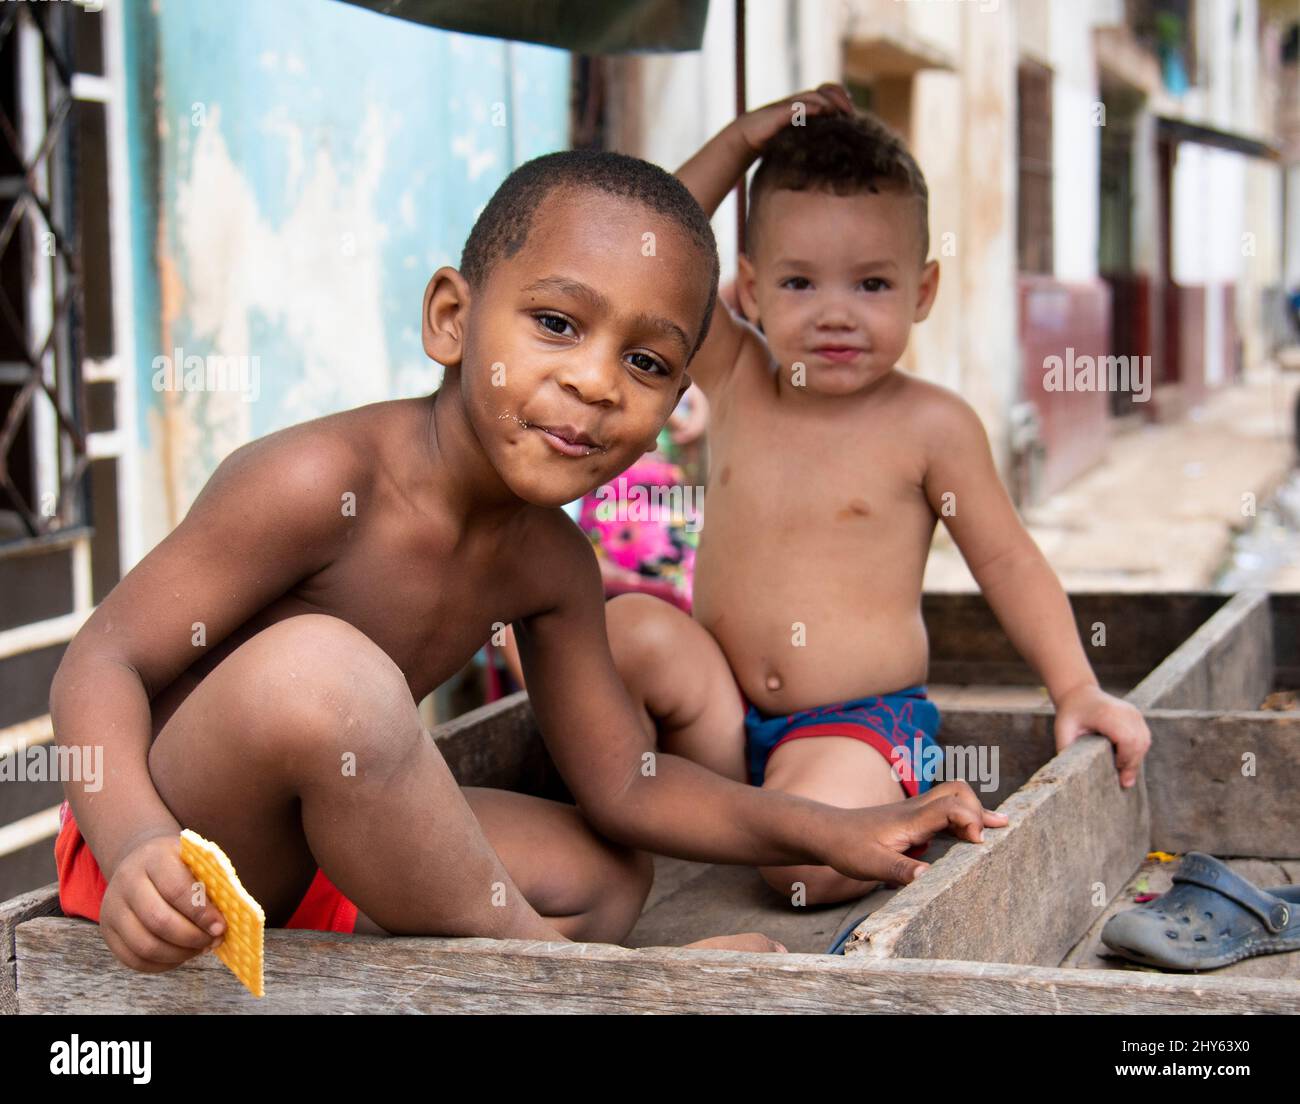 Young cuban boy eats a cookie while his friend looks and smiles at the camera while sitting on a cart in a neighborhood in Havana, Cuba. Stock Photo